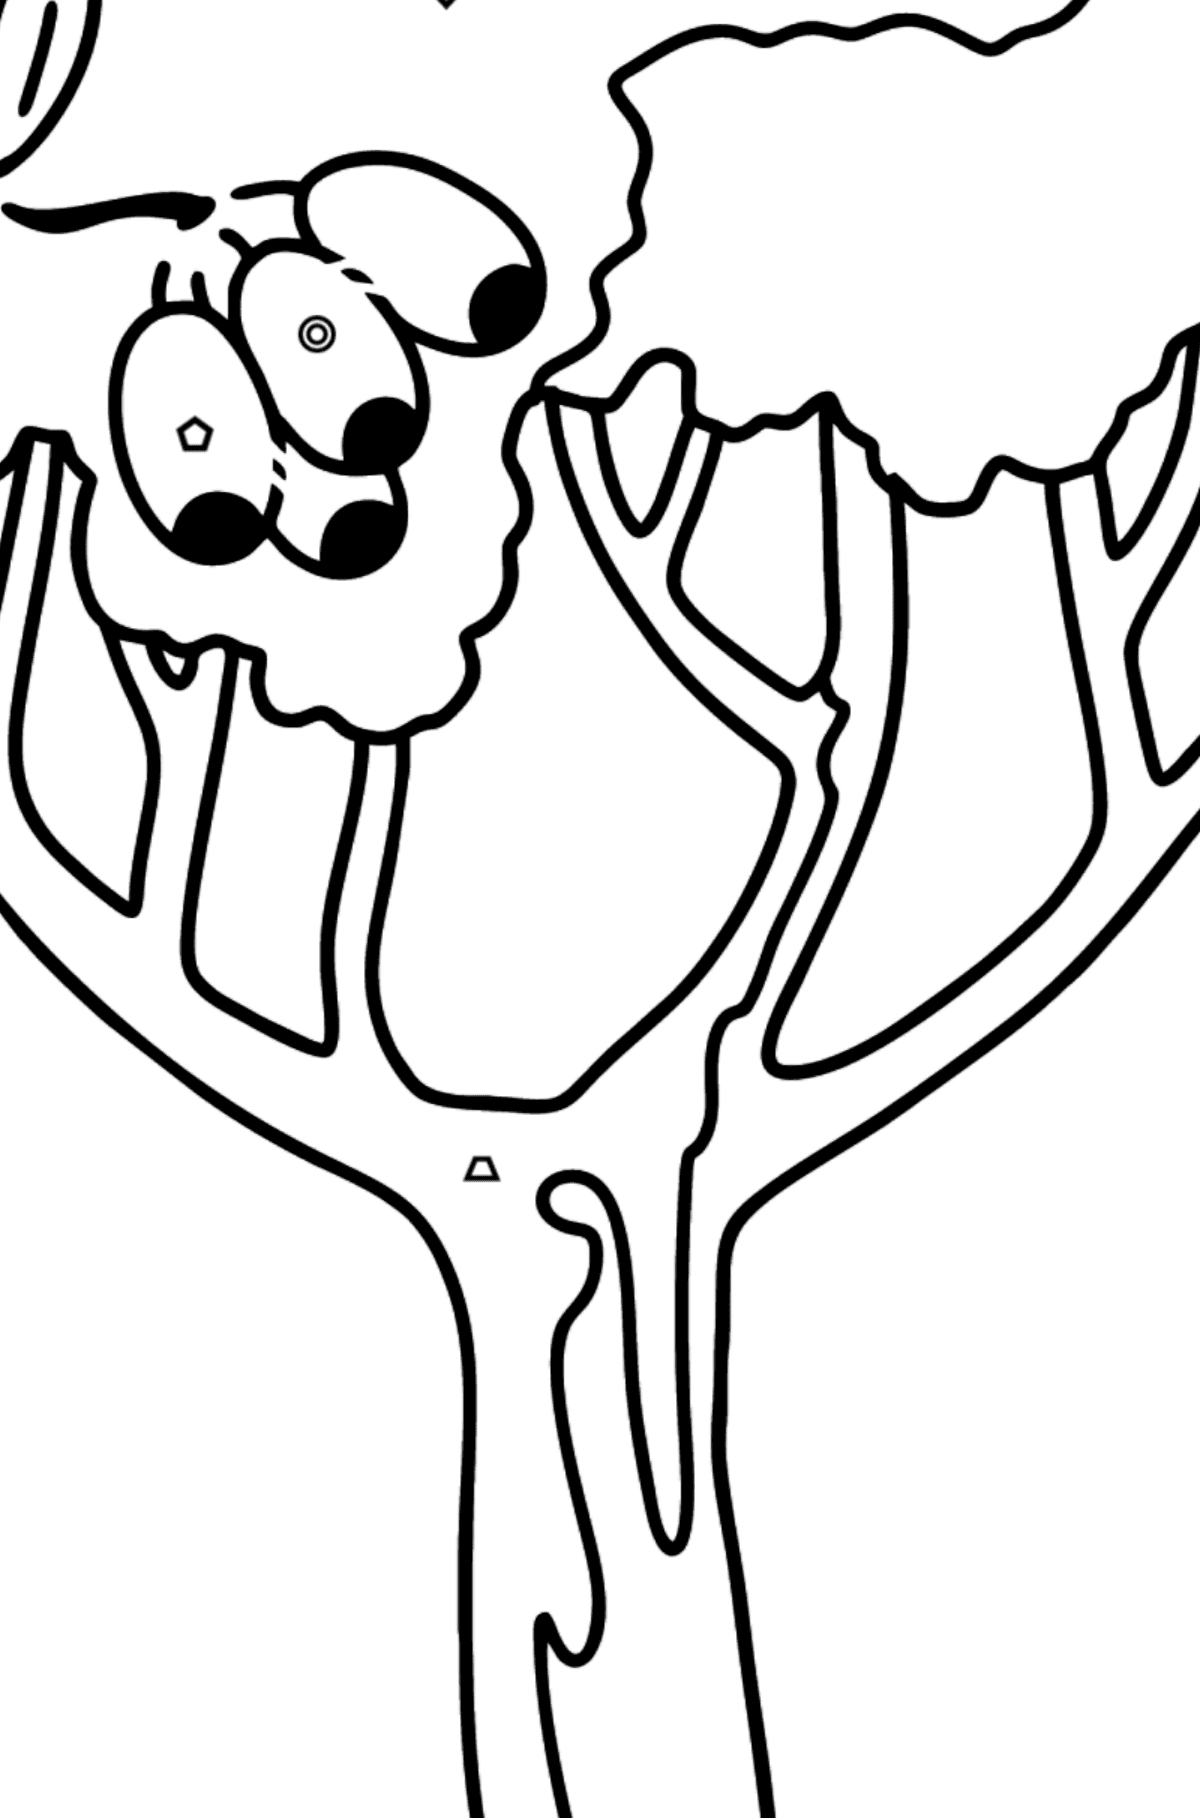 Gum tree - Corimbia coloring page - Coloring by Geometric Shapes for Kids